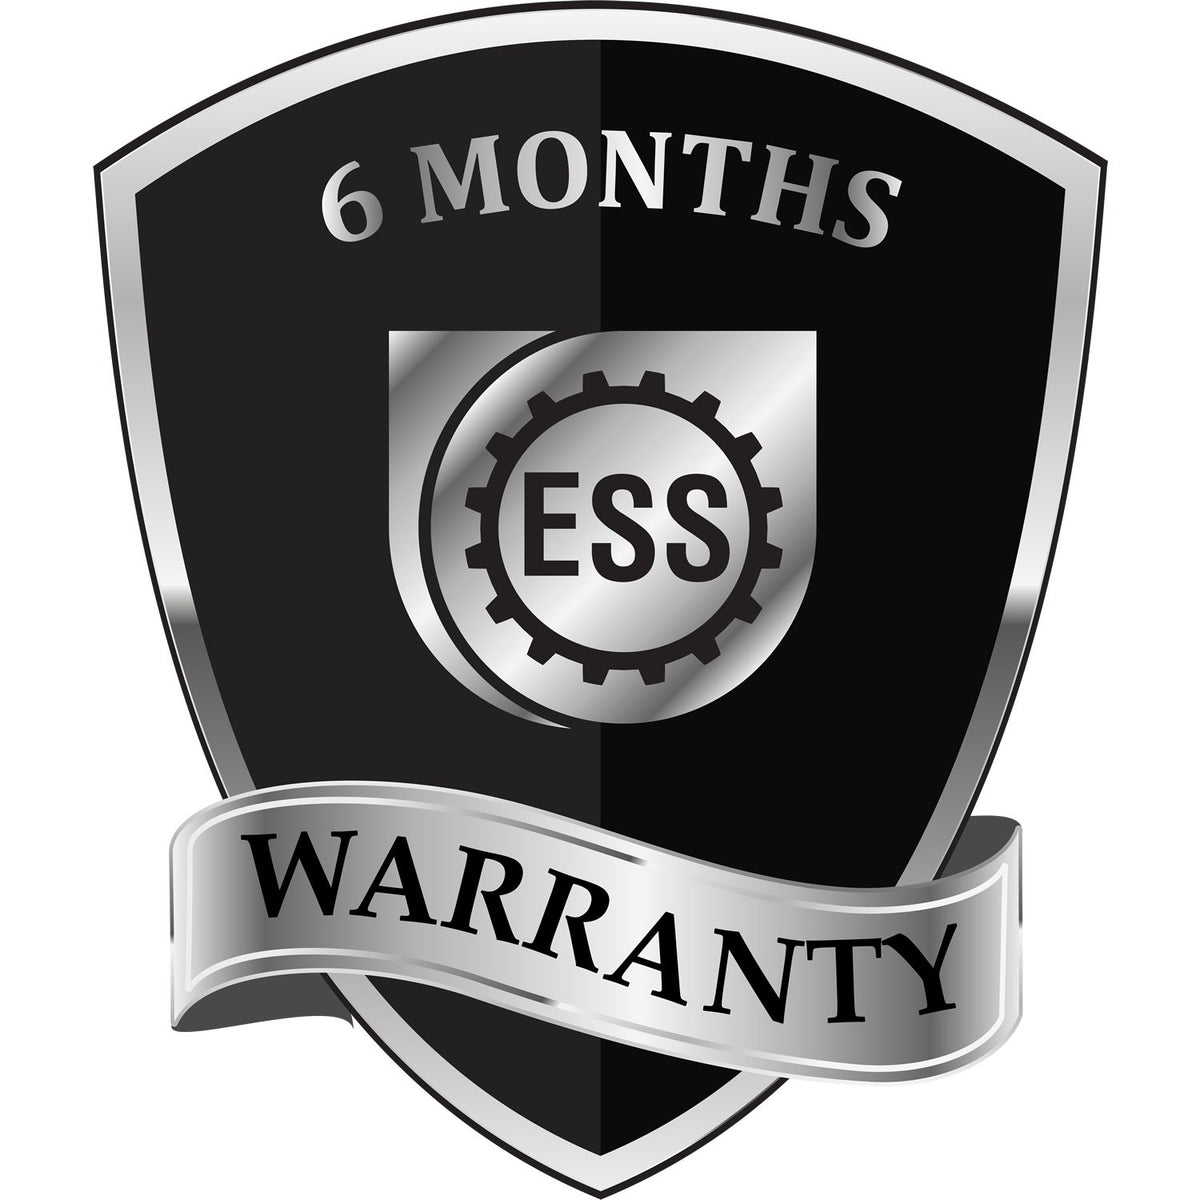 A badge or emblem showing a warranty icon for the PSI Illinois Notary Stamp